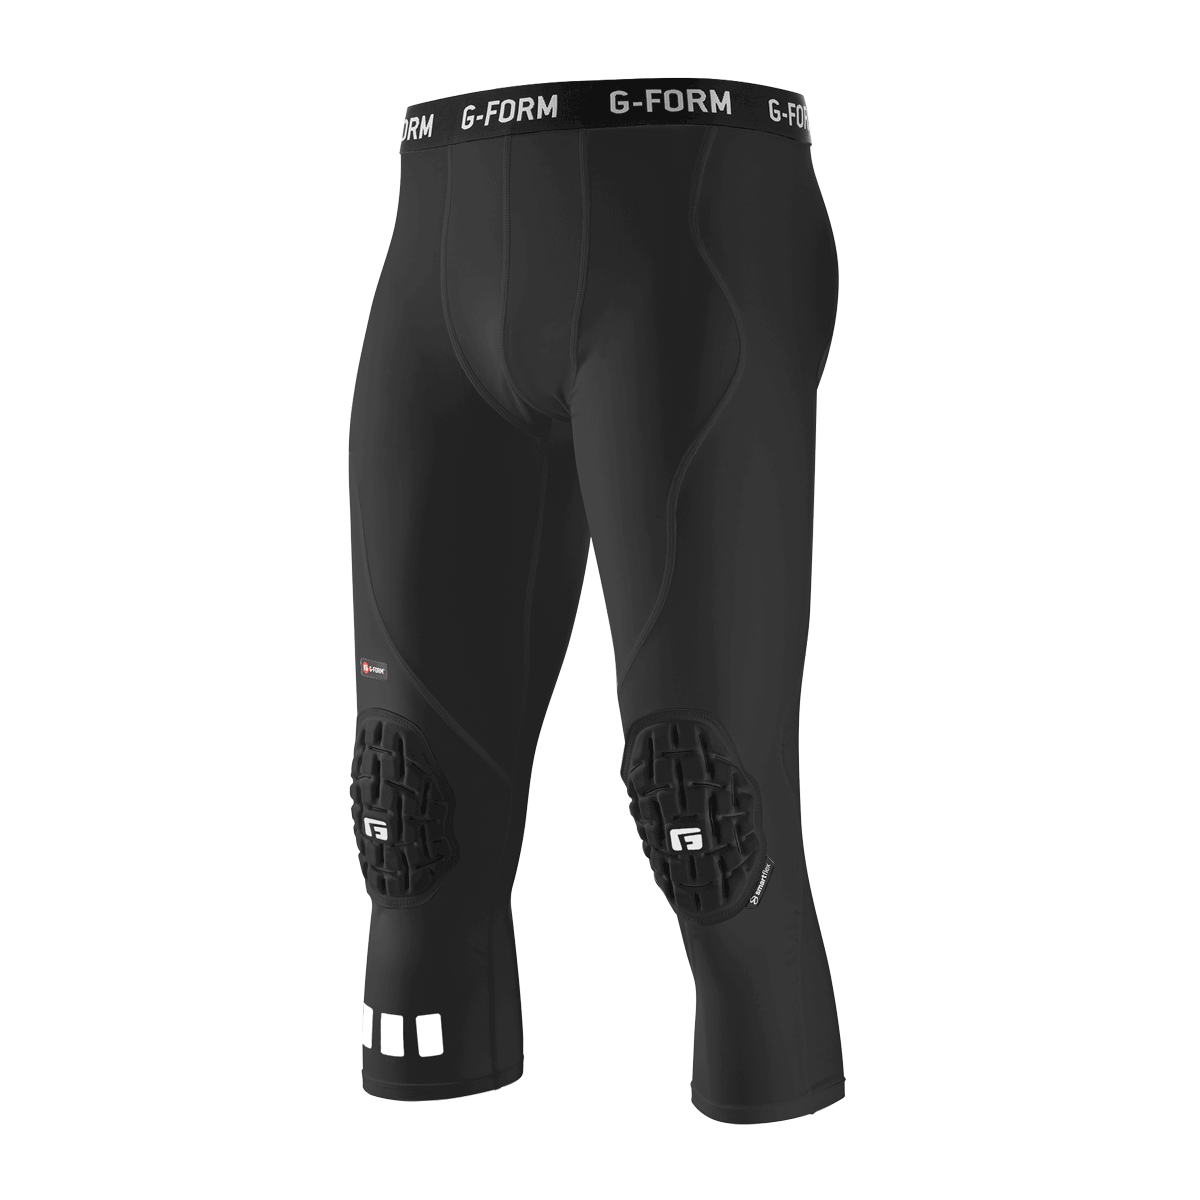 Basketball Pants with Knee Pads, Black/White Knee Pads Compression